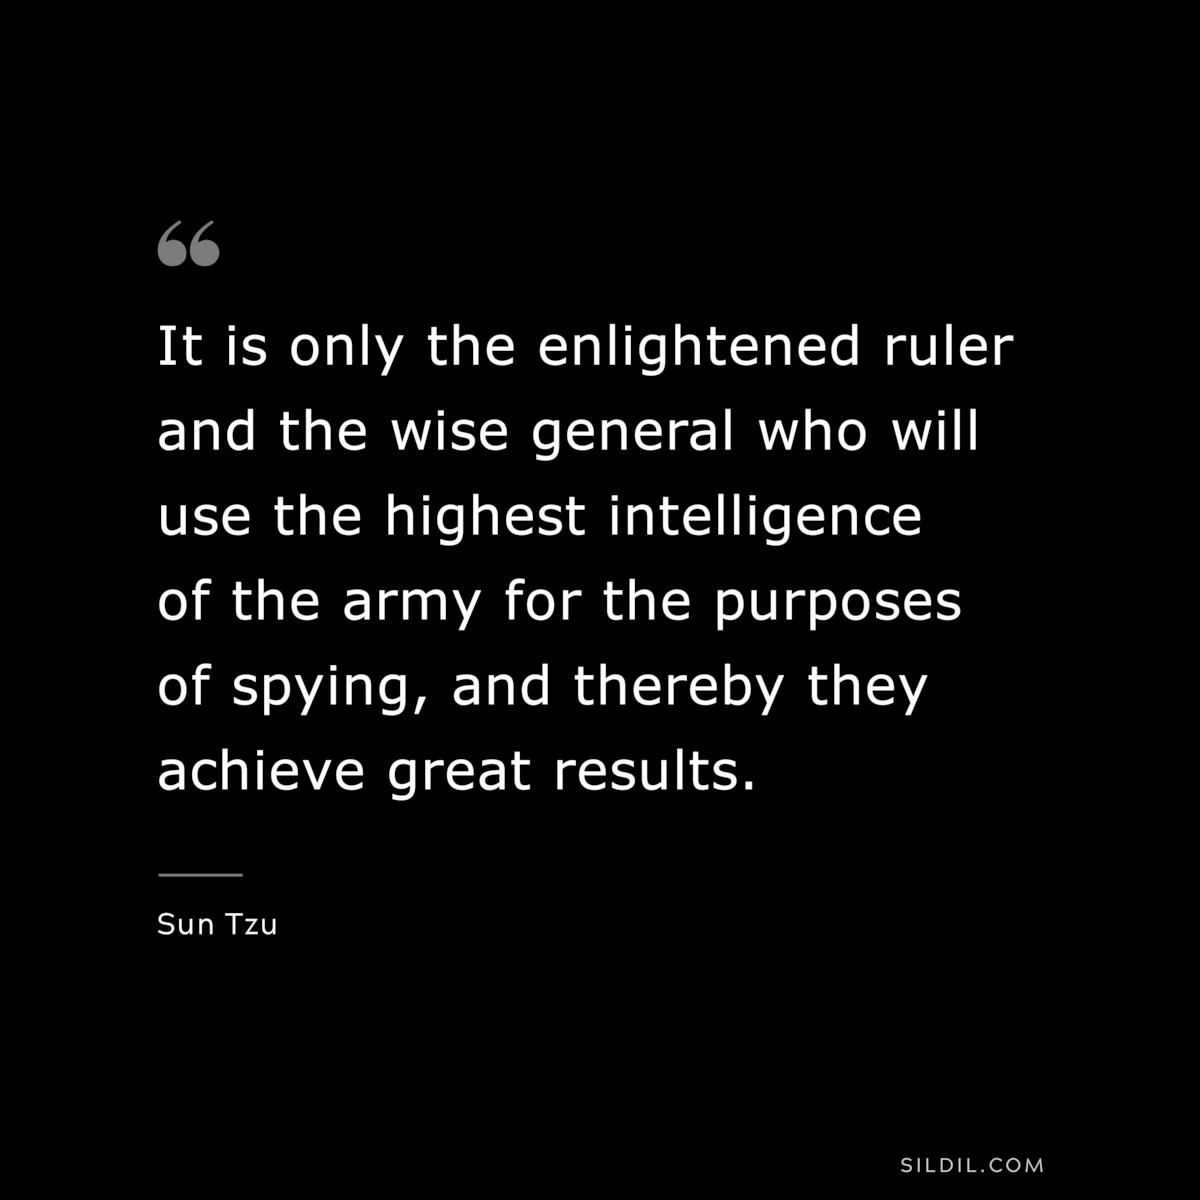 It is only the enlightened ruler and the wise general who will use the highest intelligence of the army for the purposes of spying, and thereby they achieve great results.― Sun Tzu